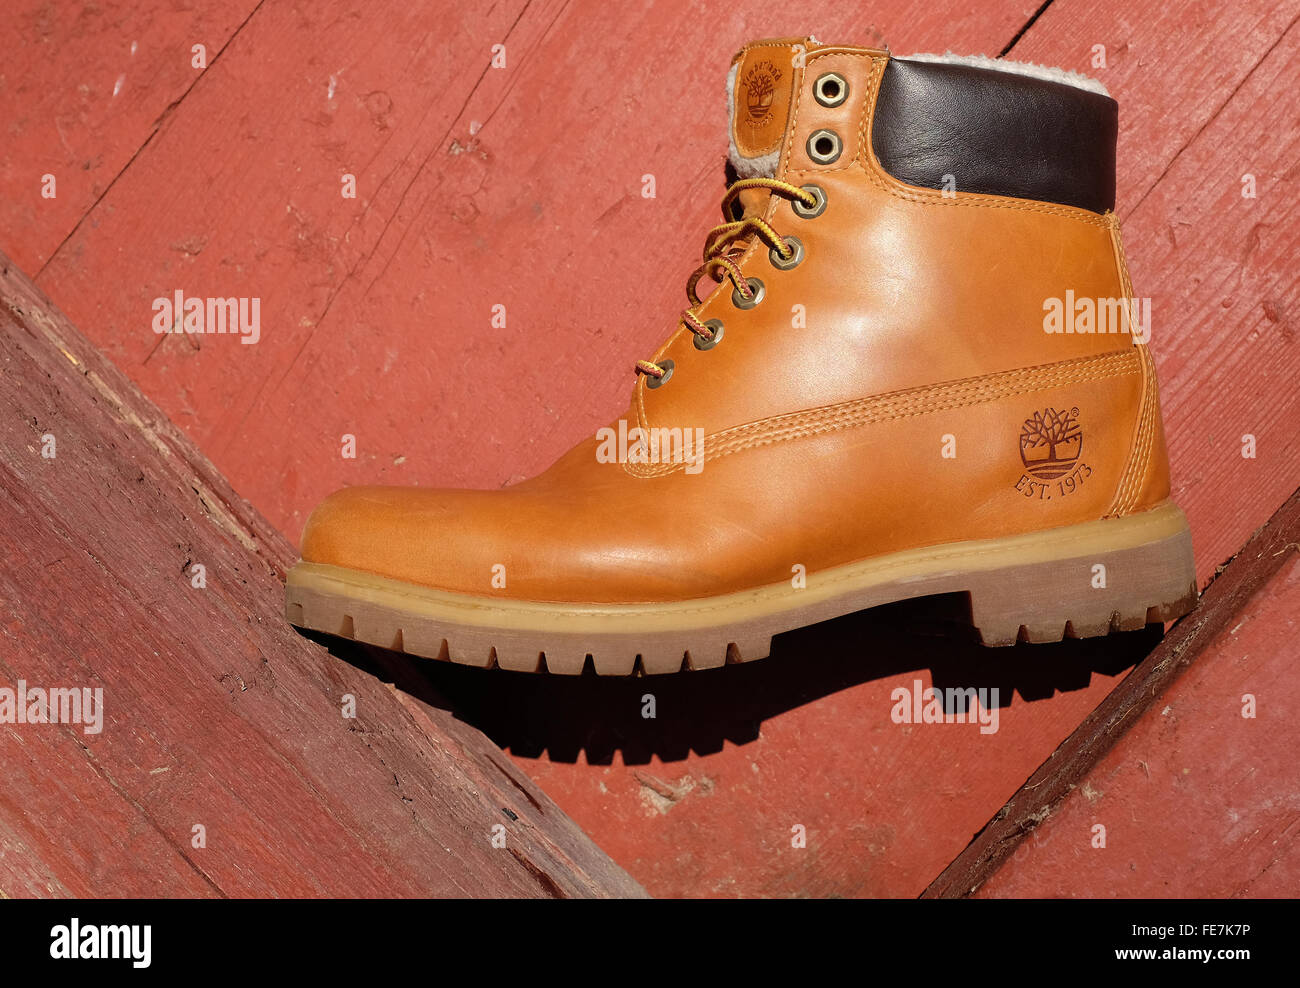 Timberland Boots High Resolution Stock Photography and Images - Alamy